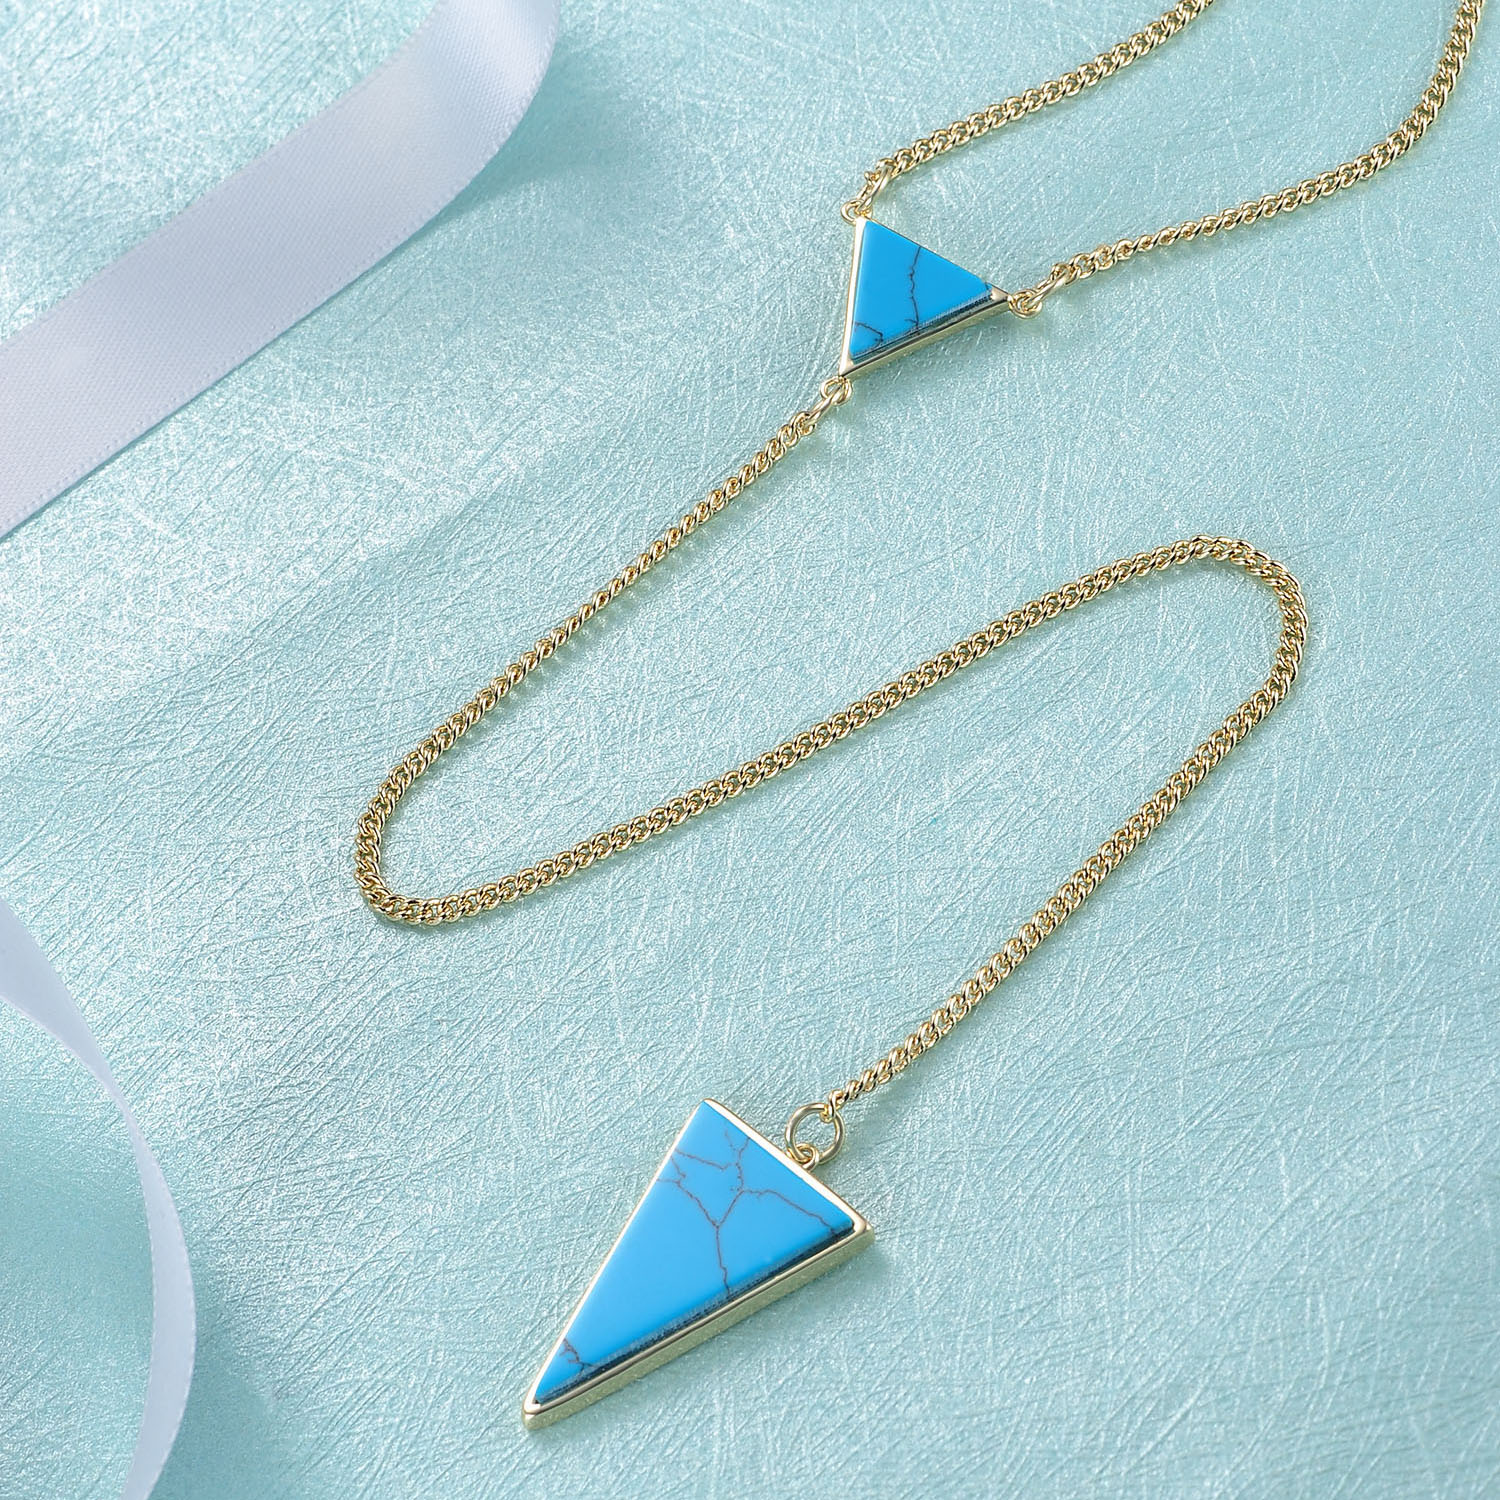 Fashion Costume Unique Hawaii 14k Gold Plated Triangle Earrings Necklace Women Turquoise Jewelry Set